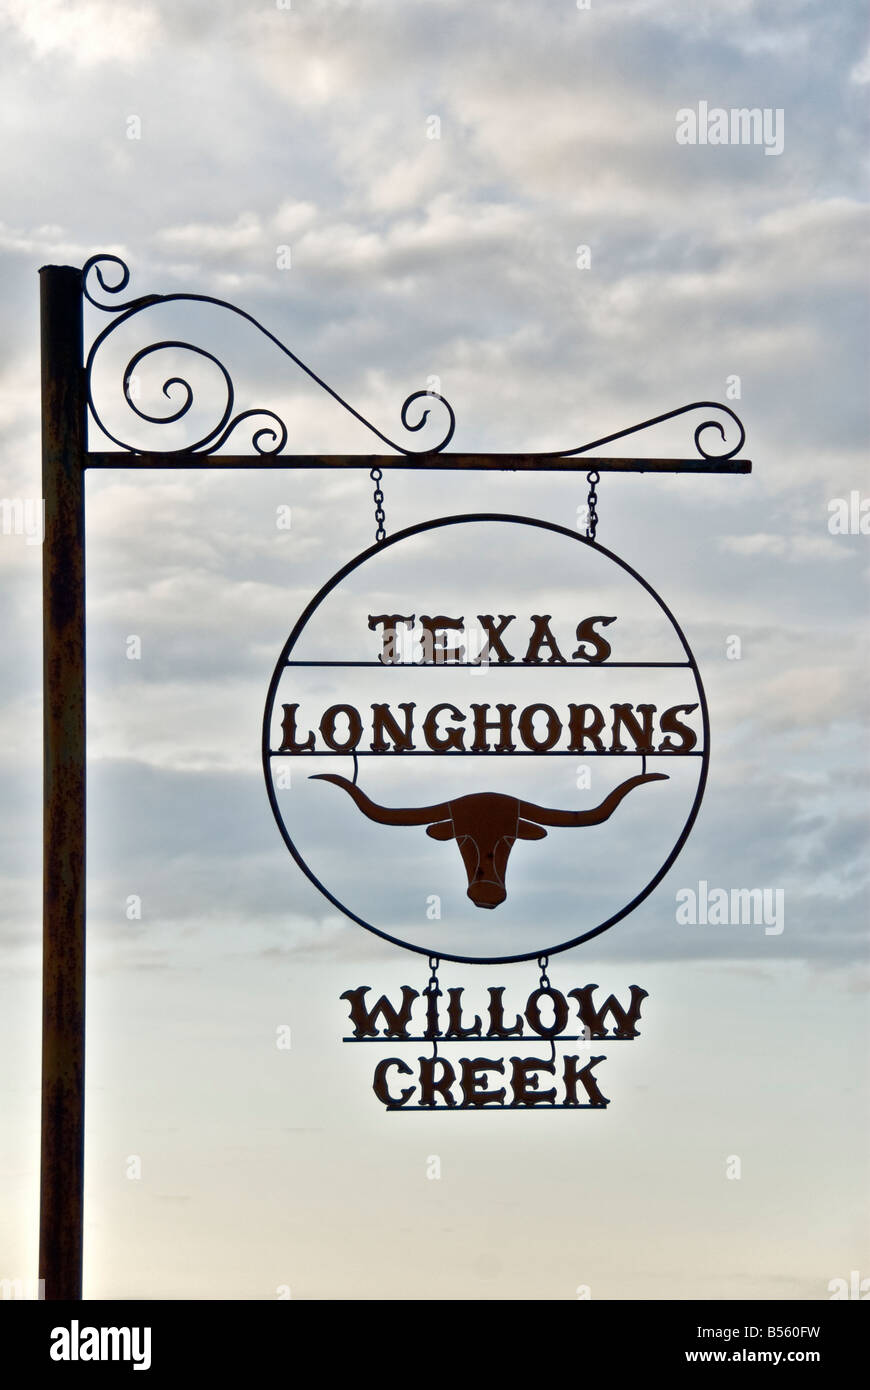 Texas Hill Country Texas Longhorns Willow Creek cattle ranch sign Stock Photo